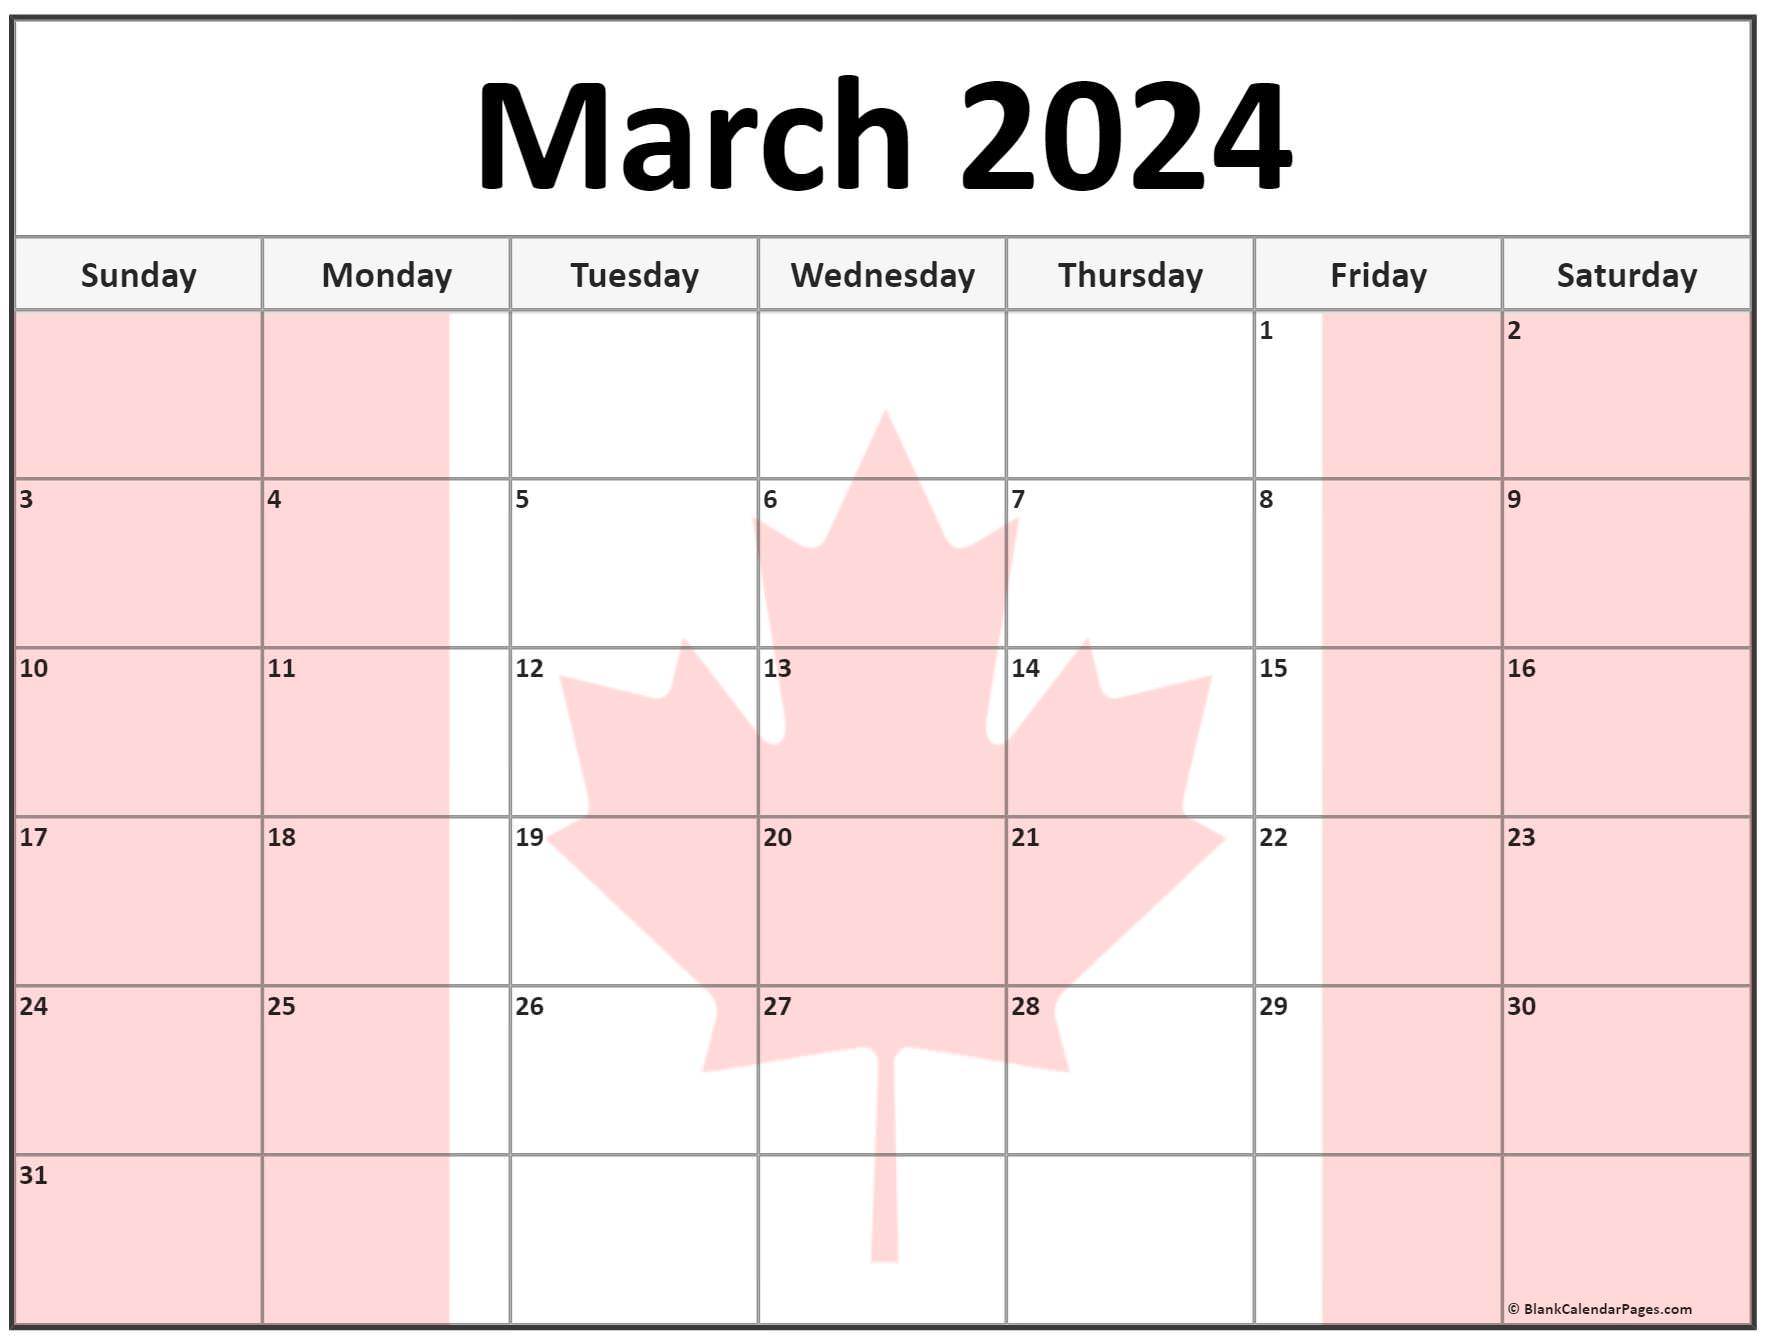 Collection of March 2024 photo calendars with image filters.